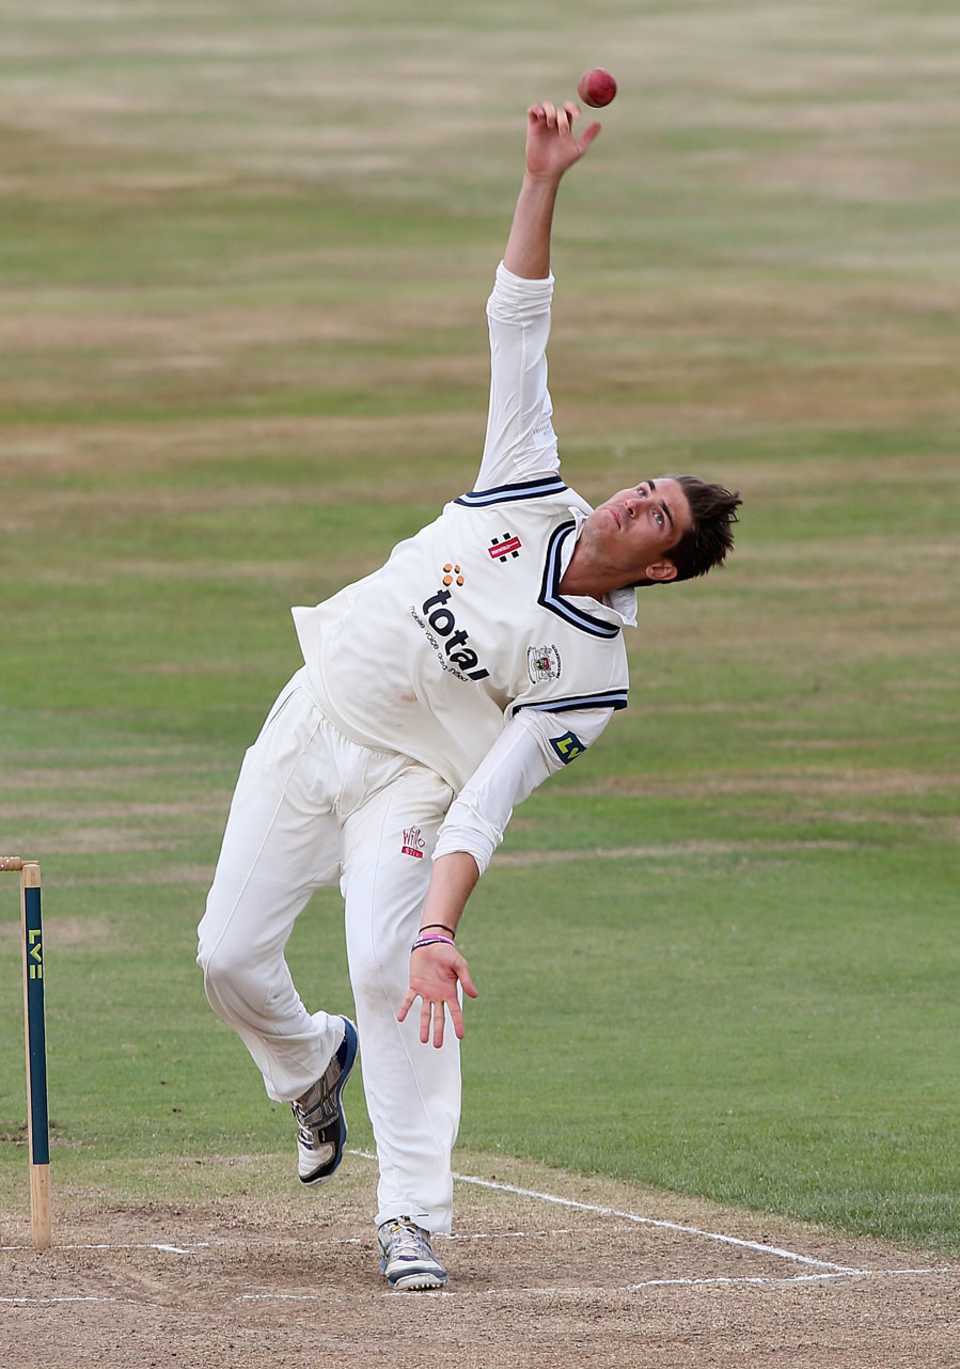 Tom Shrewsbury in his delivery stride